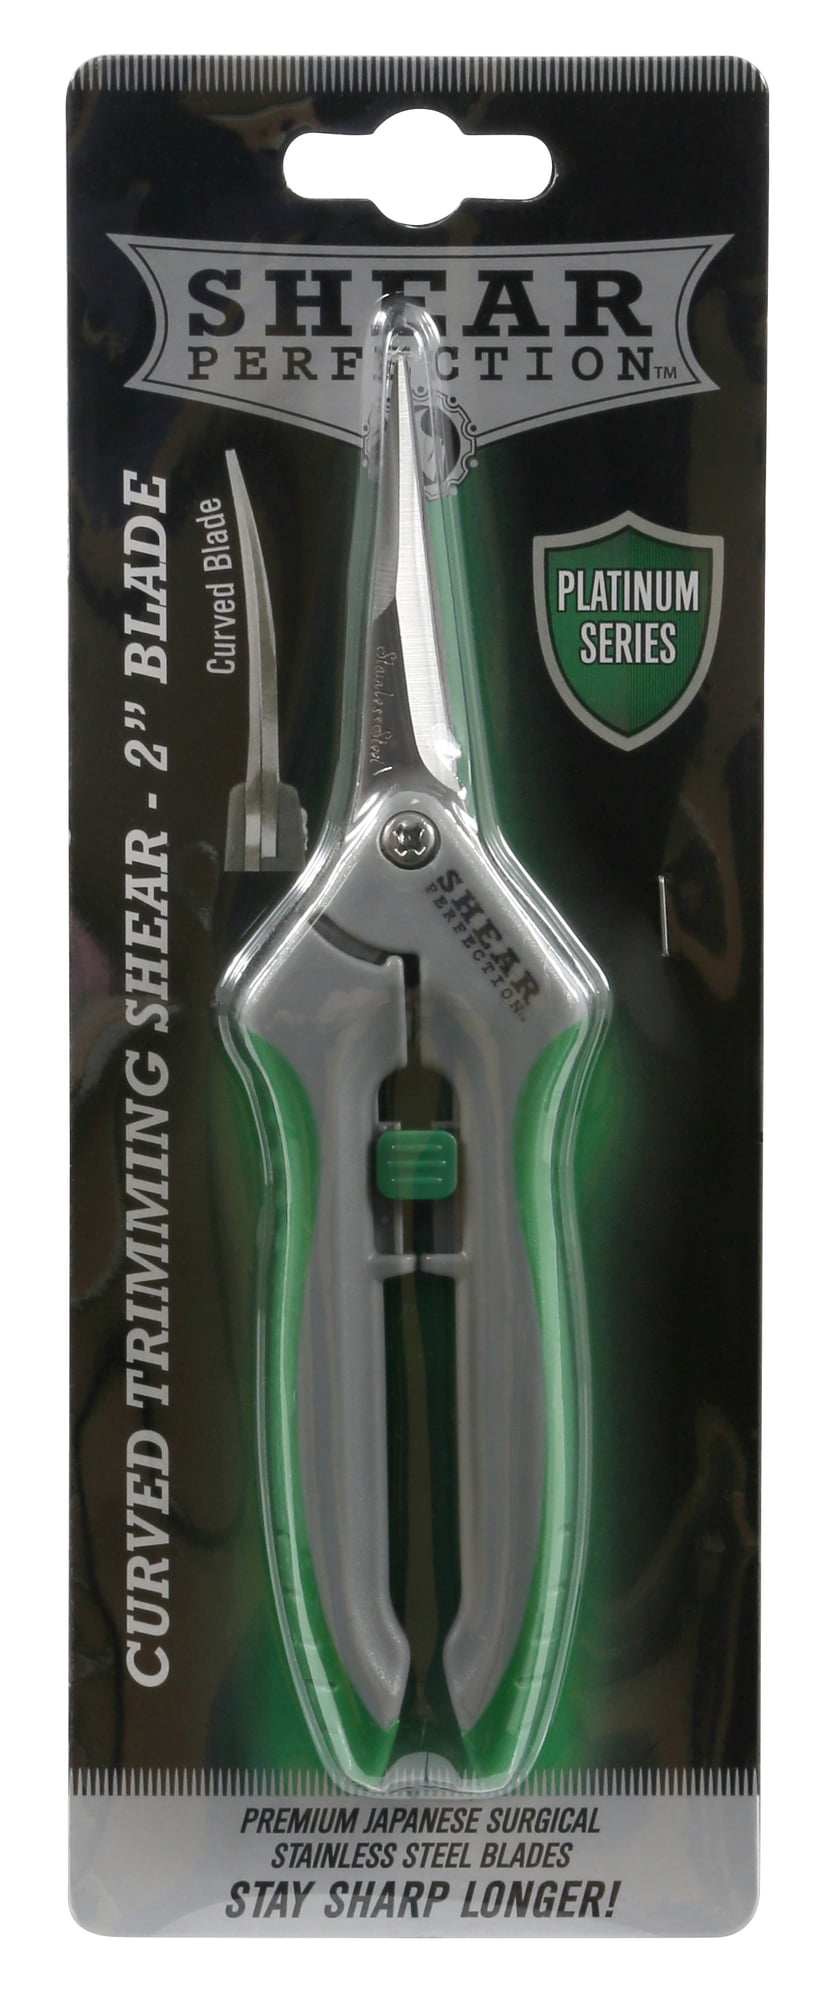 Shear Perfection Stainless Steel Trimming Shears Platinum Series 2 Curved Blades 